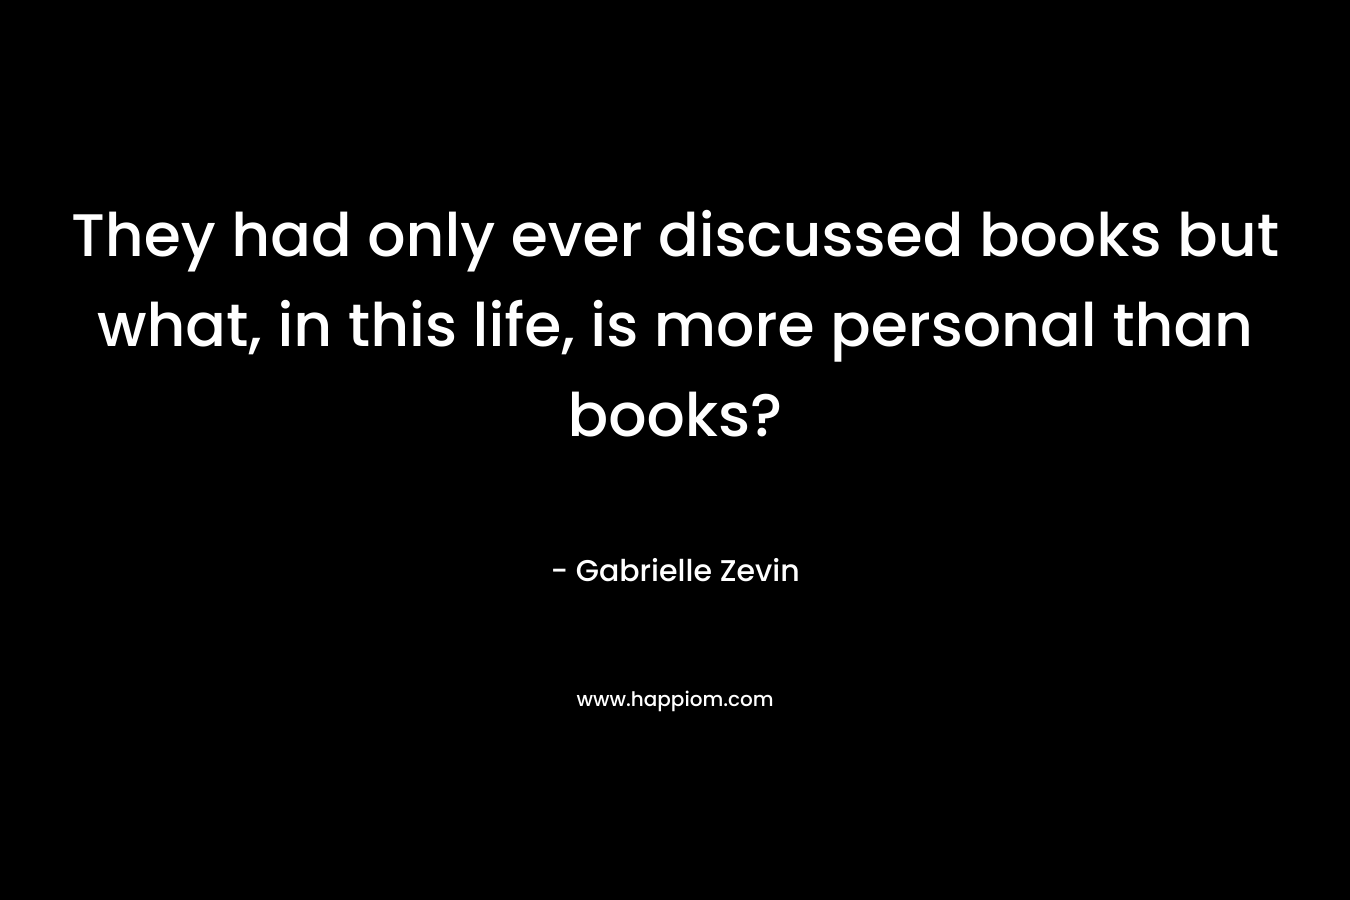 They had only ever discussed books but what, in this life, is more personal than books?